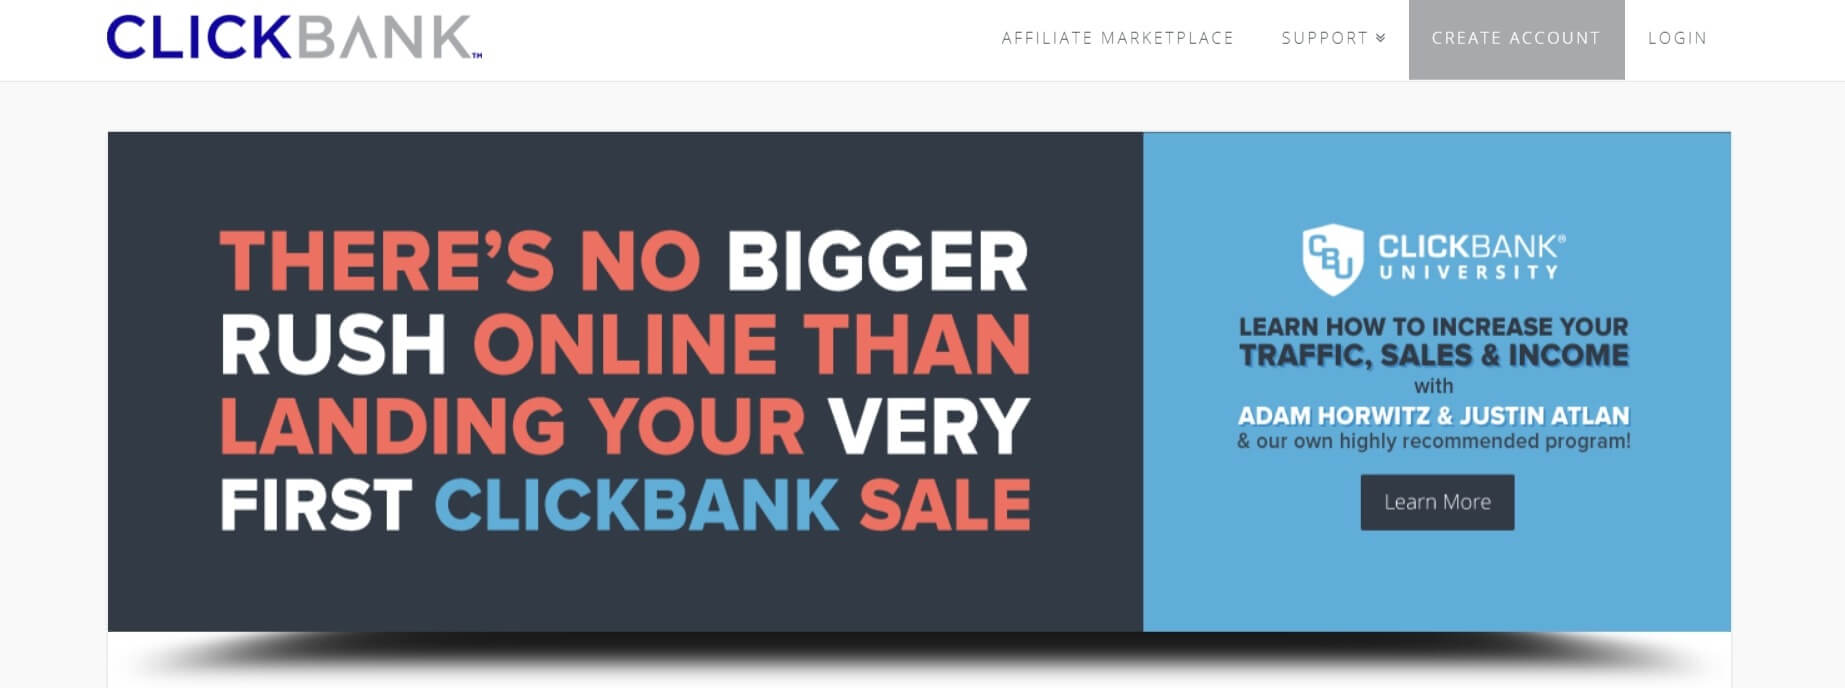 The Clickbank homepage